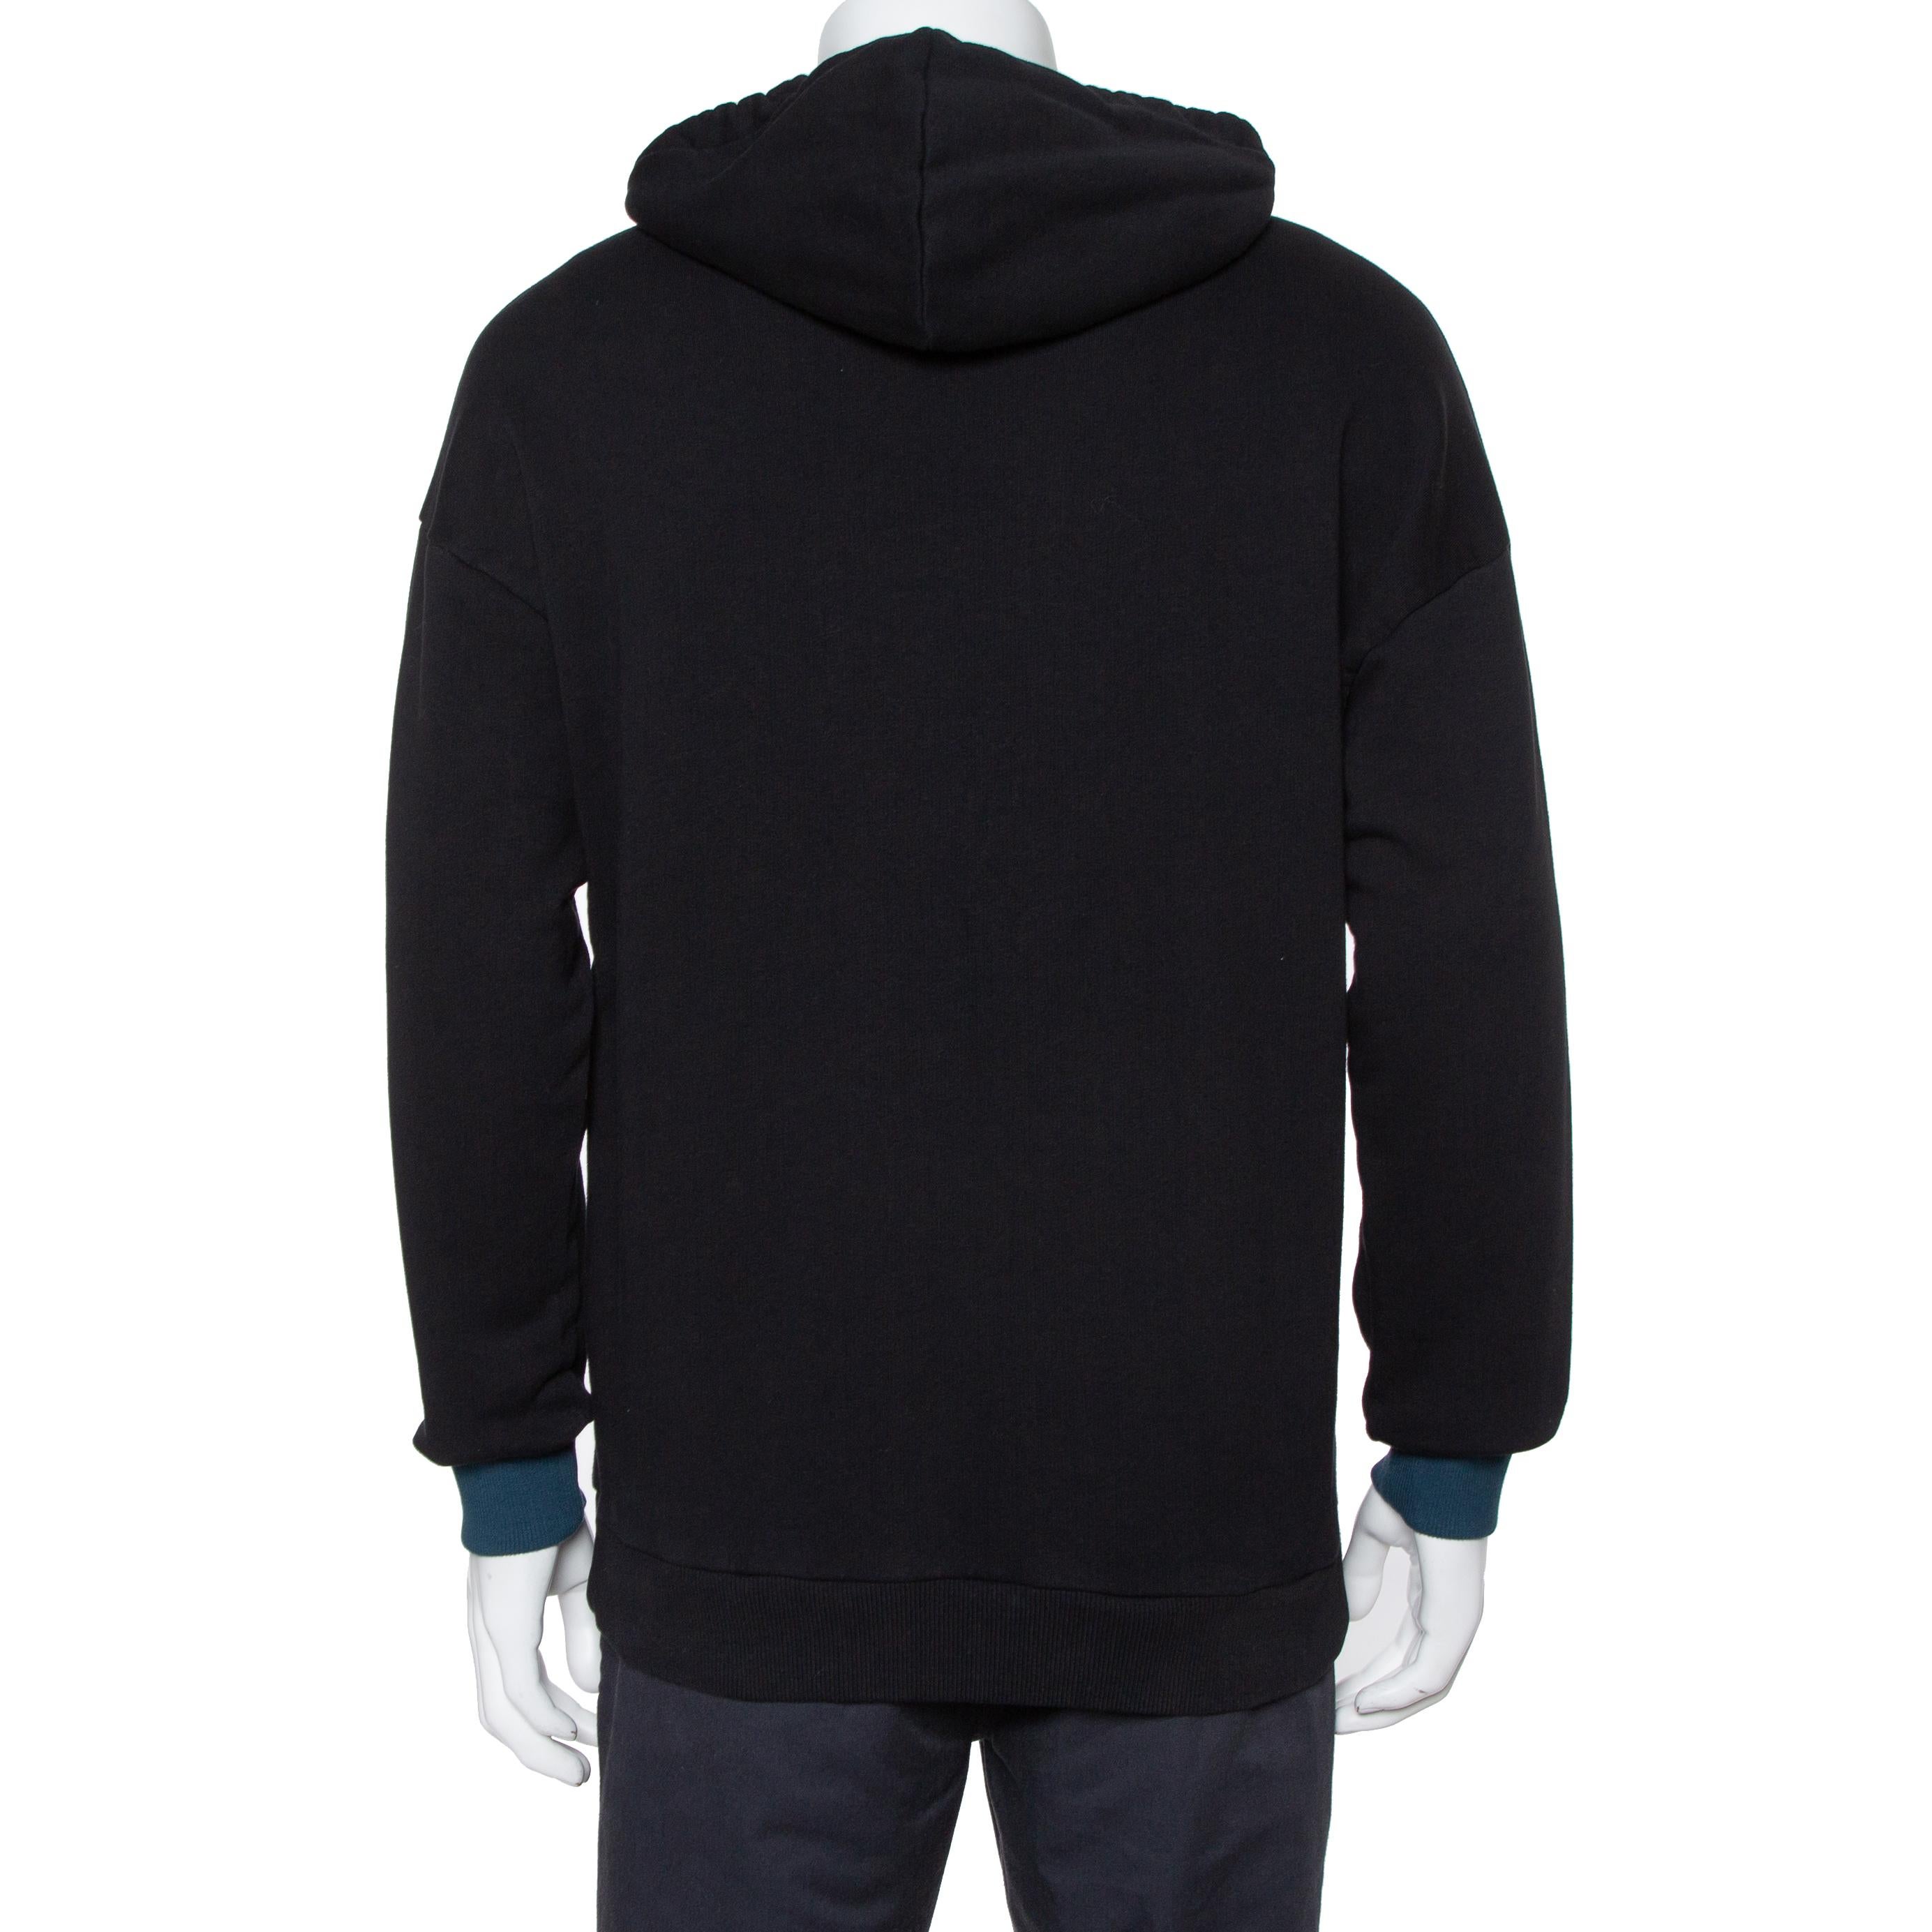 This hooded sweatshirt from Givenchy is perfect for your casual wear. It is made from quality cotton to give you comfort and designed with contrast cuffs on the long sleeves and the brand name embroidered on the front. This creation definitely